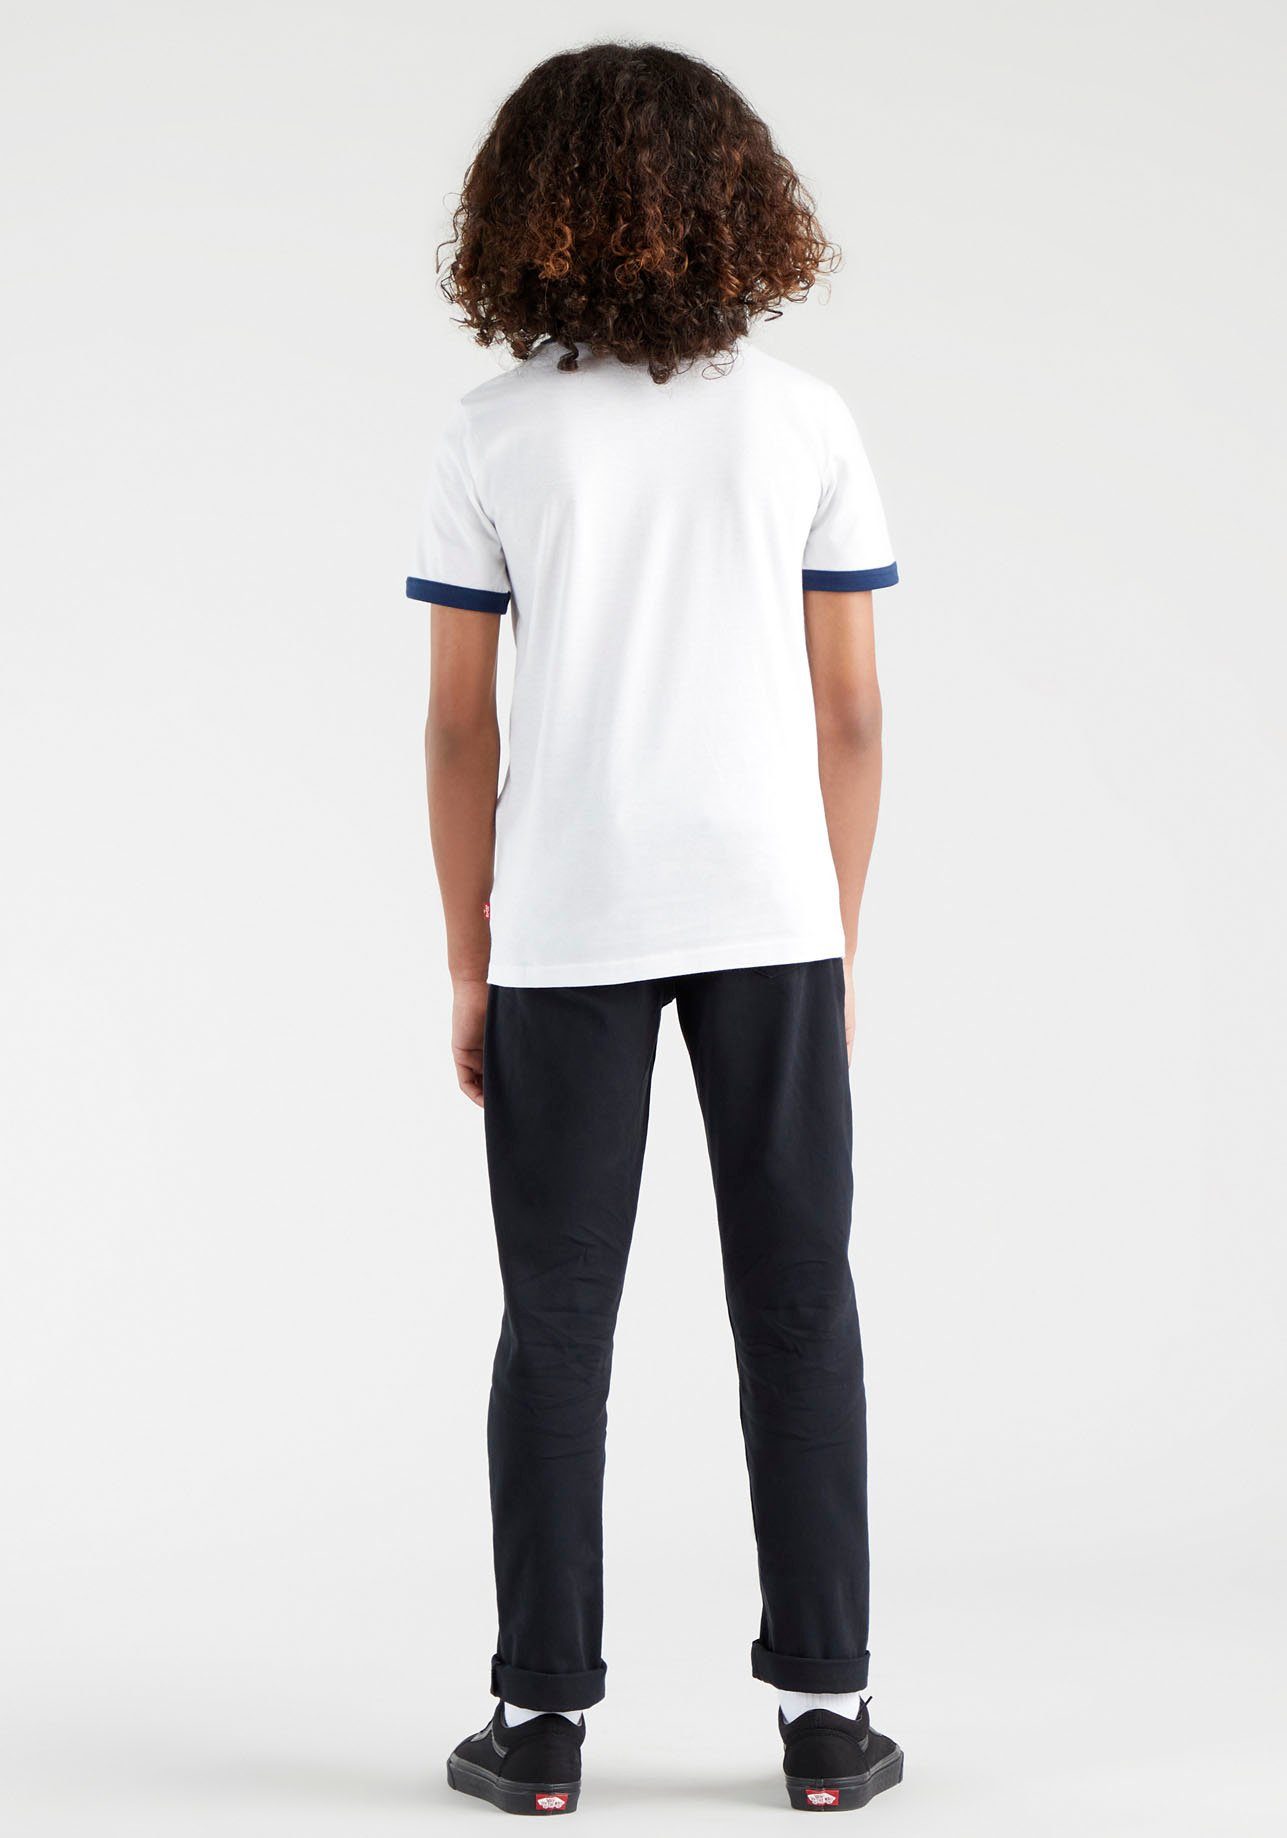 Kids T-Shirt weiß BOYS RINGER for BATWING Levi's® TEE